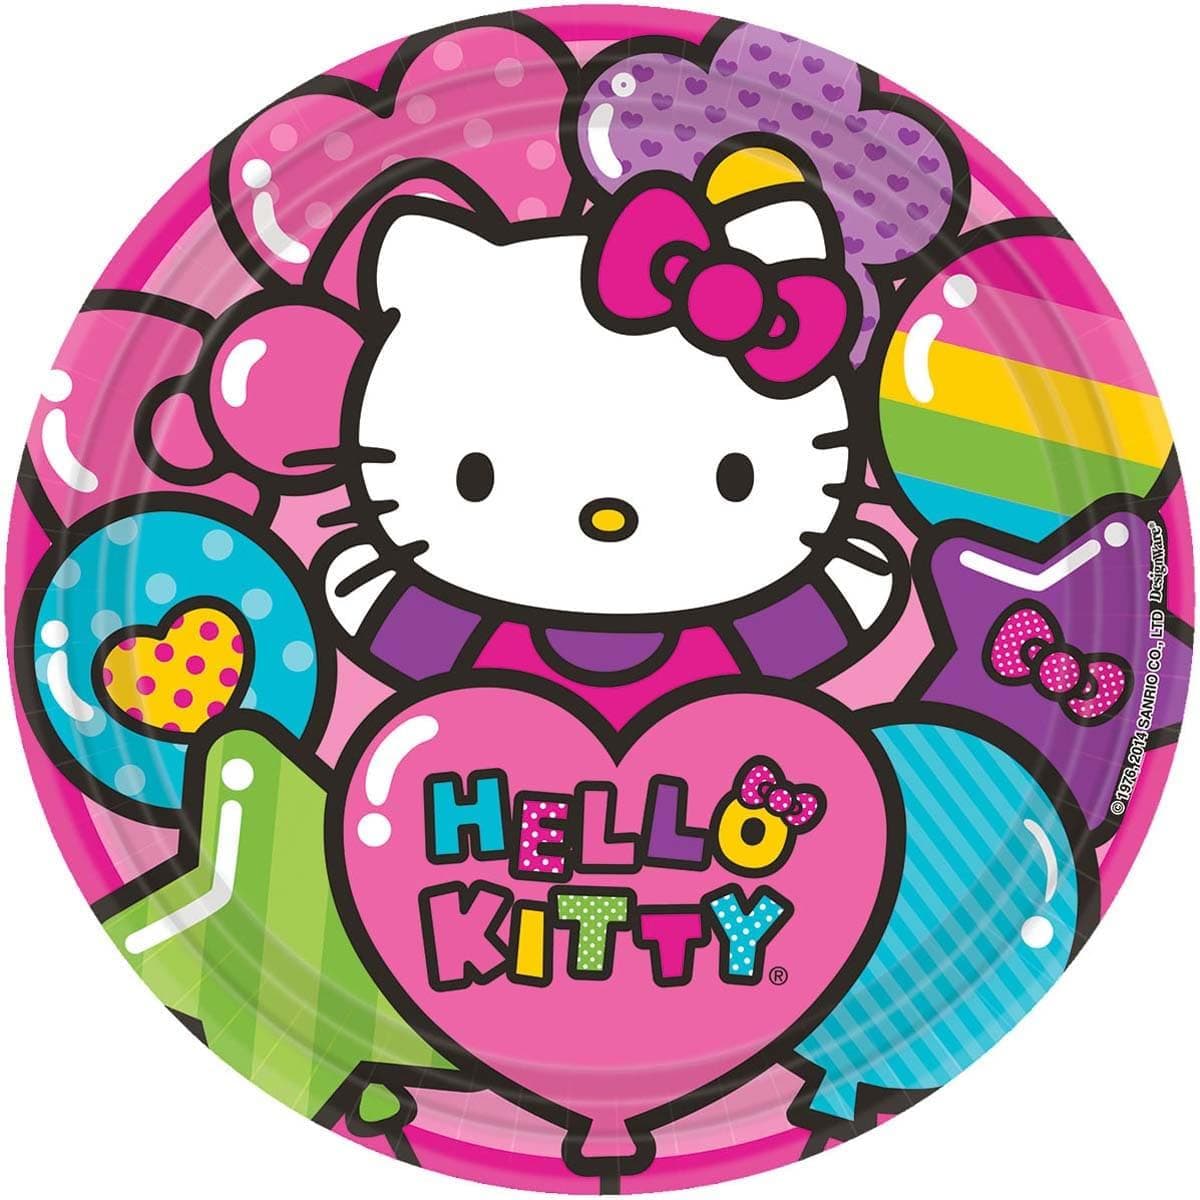 Buy Kids Birthday Hello Kitty Rainbow Dinner Plates 9 inches, 8 per package sold at Party Expert